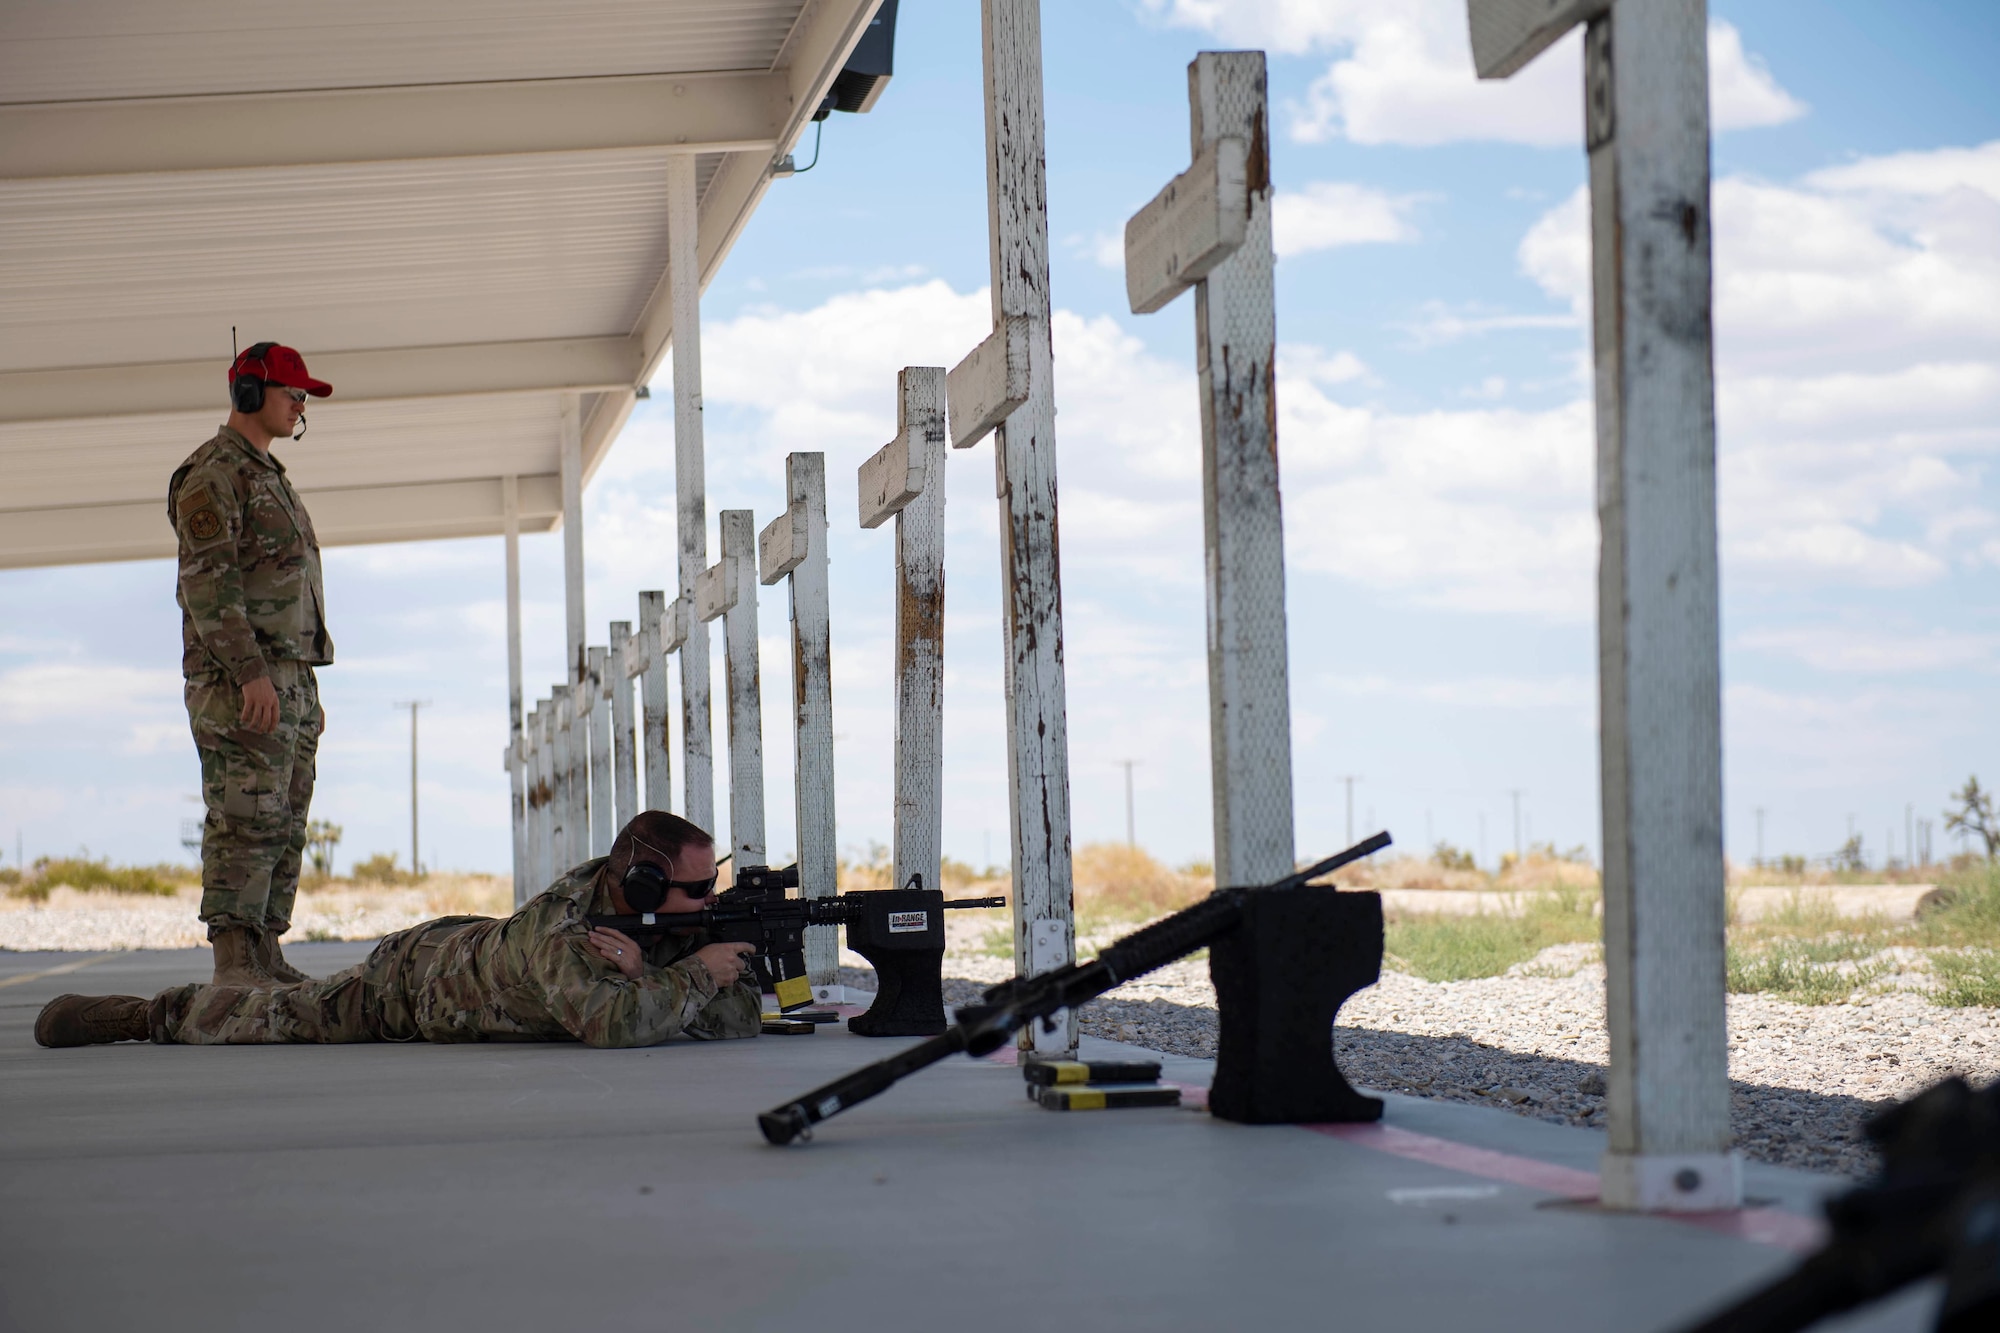 A CATM instructor observes as a male student fires an M4 carbine